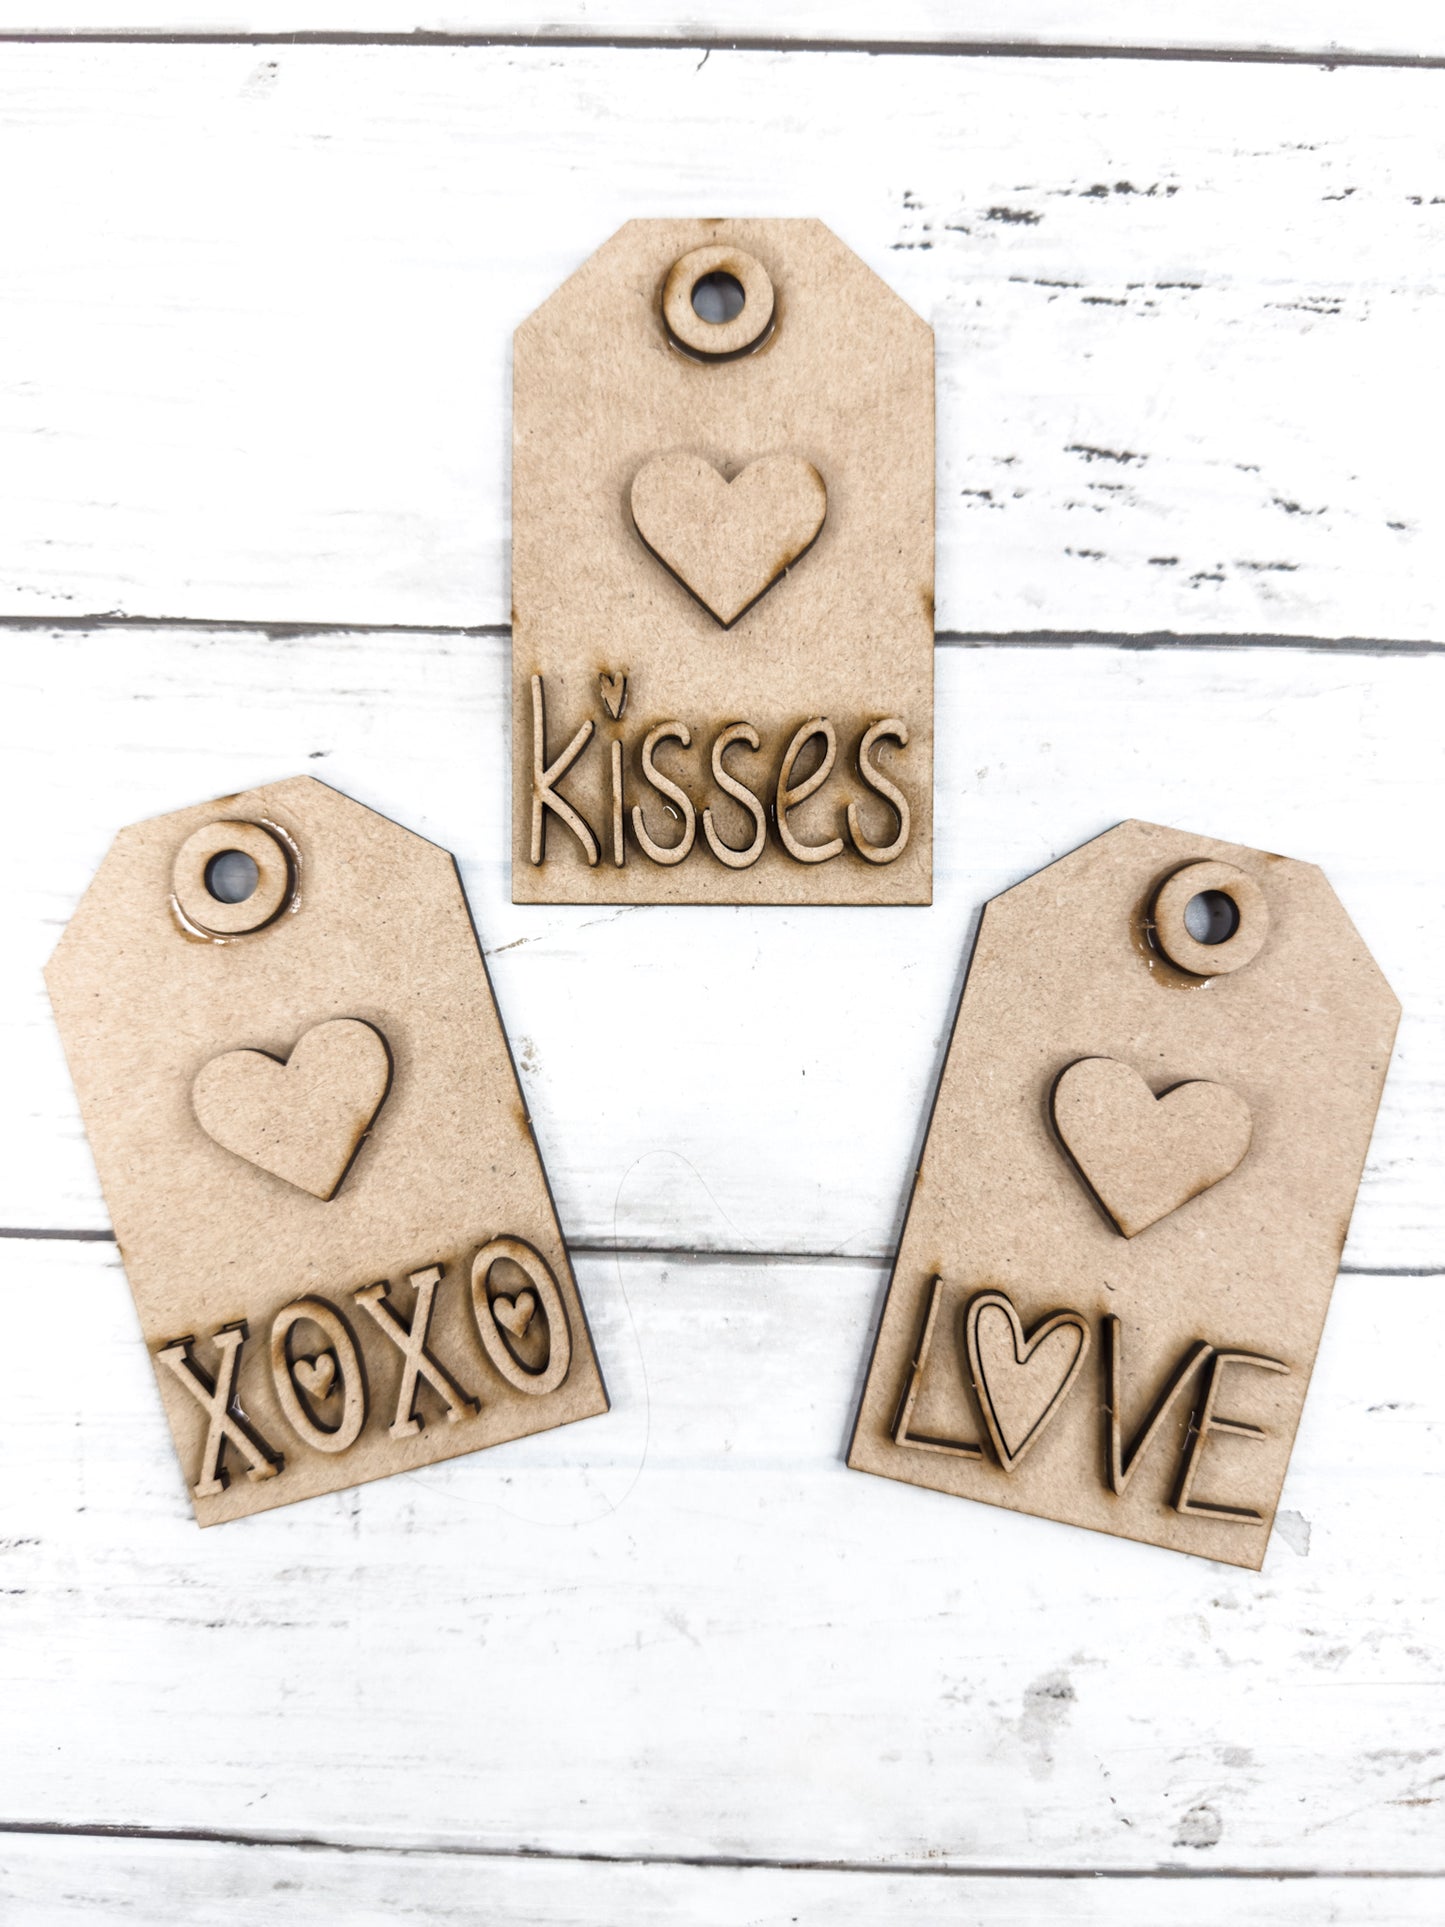 3 Valentine's Tags with hearts DIY Kit